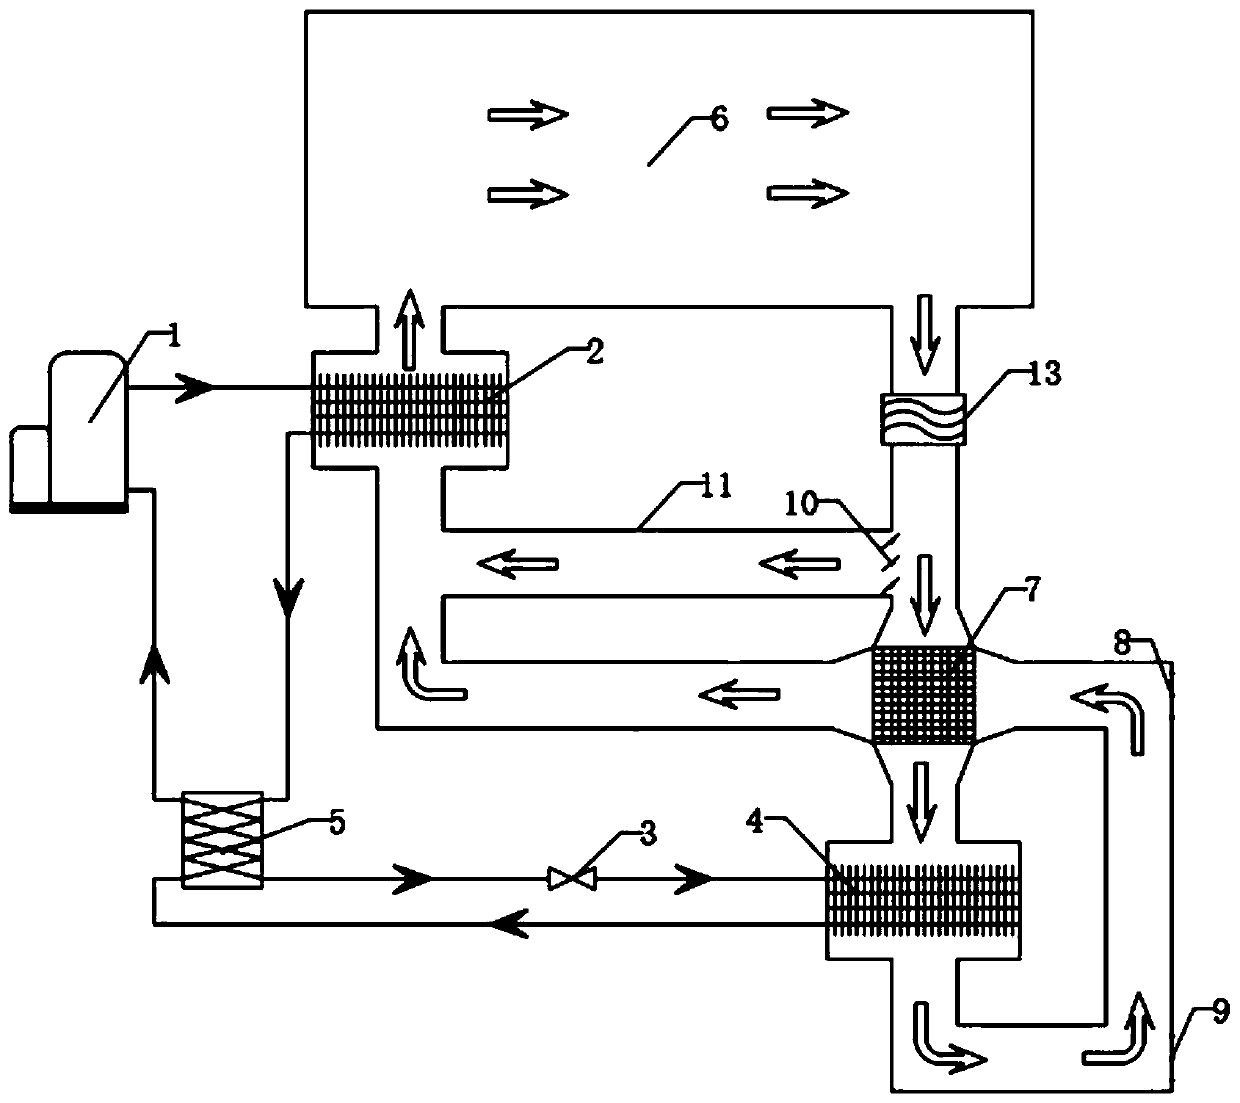 A co-based  <sub>2</sub> Drying system with transcritical heat pump cycle